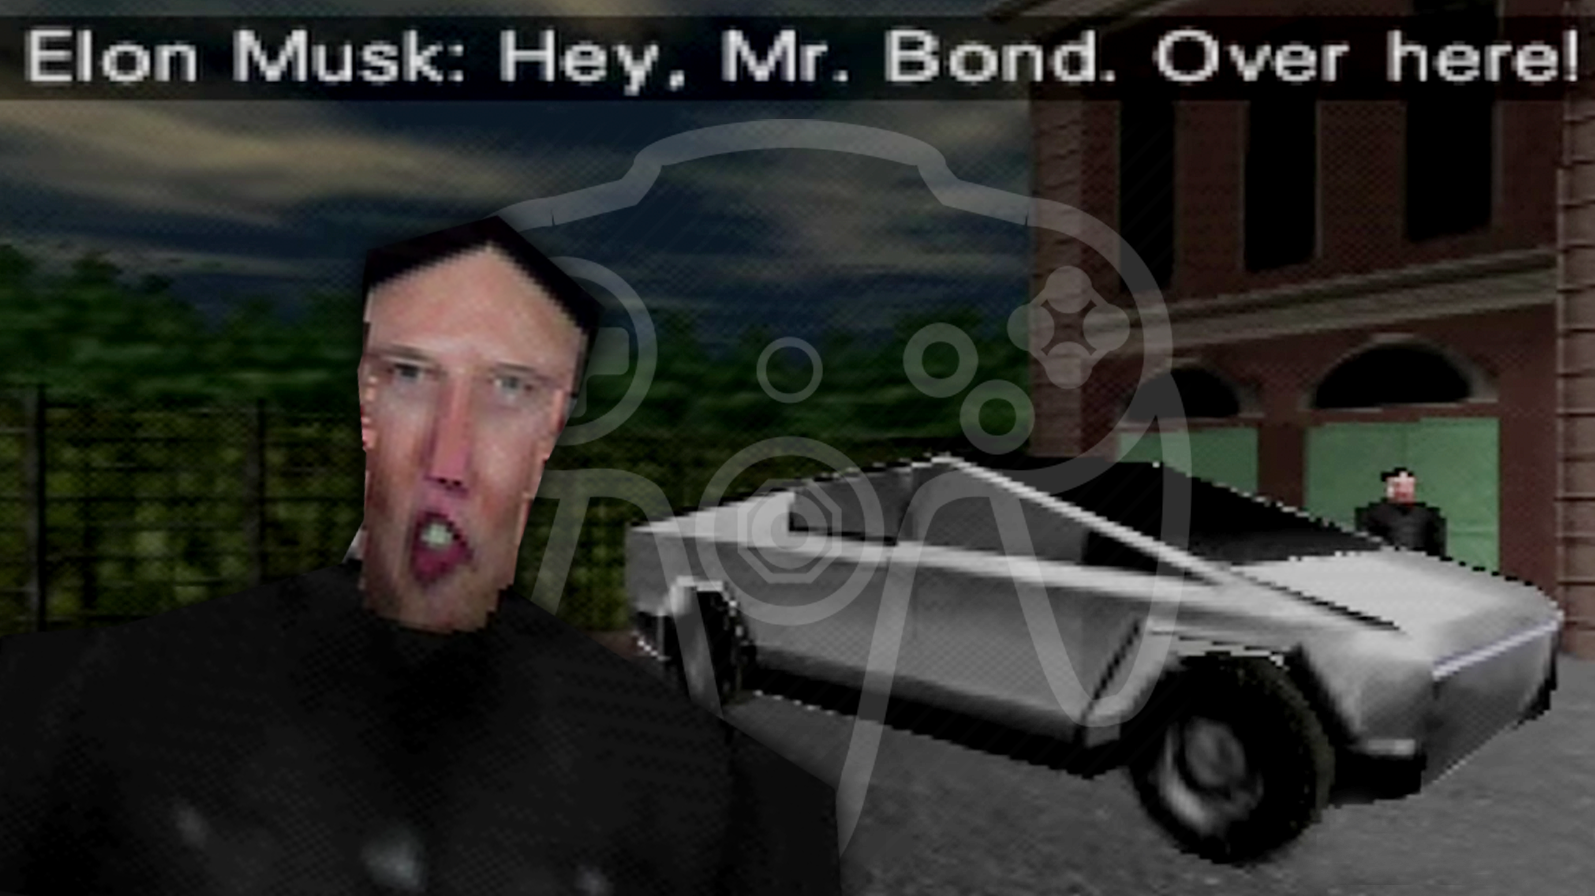 Someone Hacked The Tesla Cybertruck And Elon Musk Into N64’s Golden Eye And It’s Perfect, Just Perfect